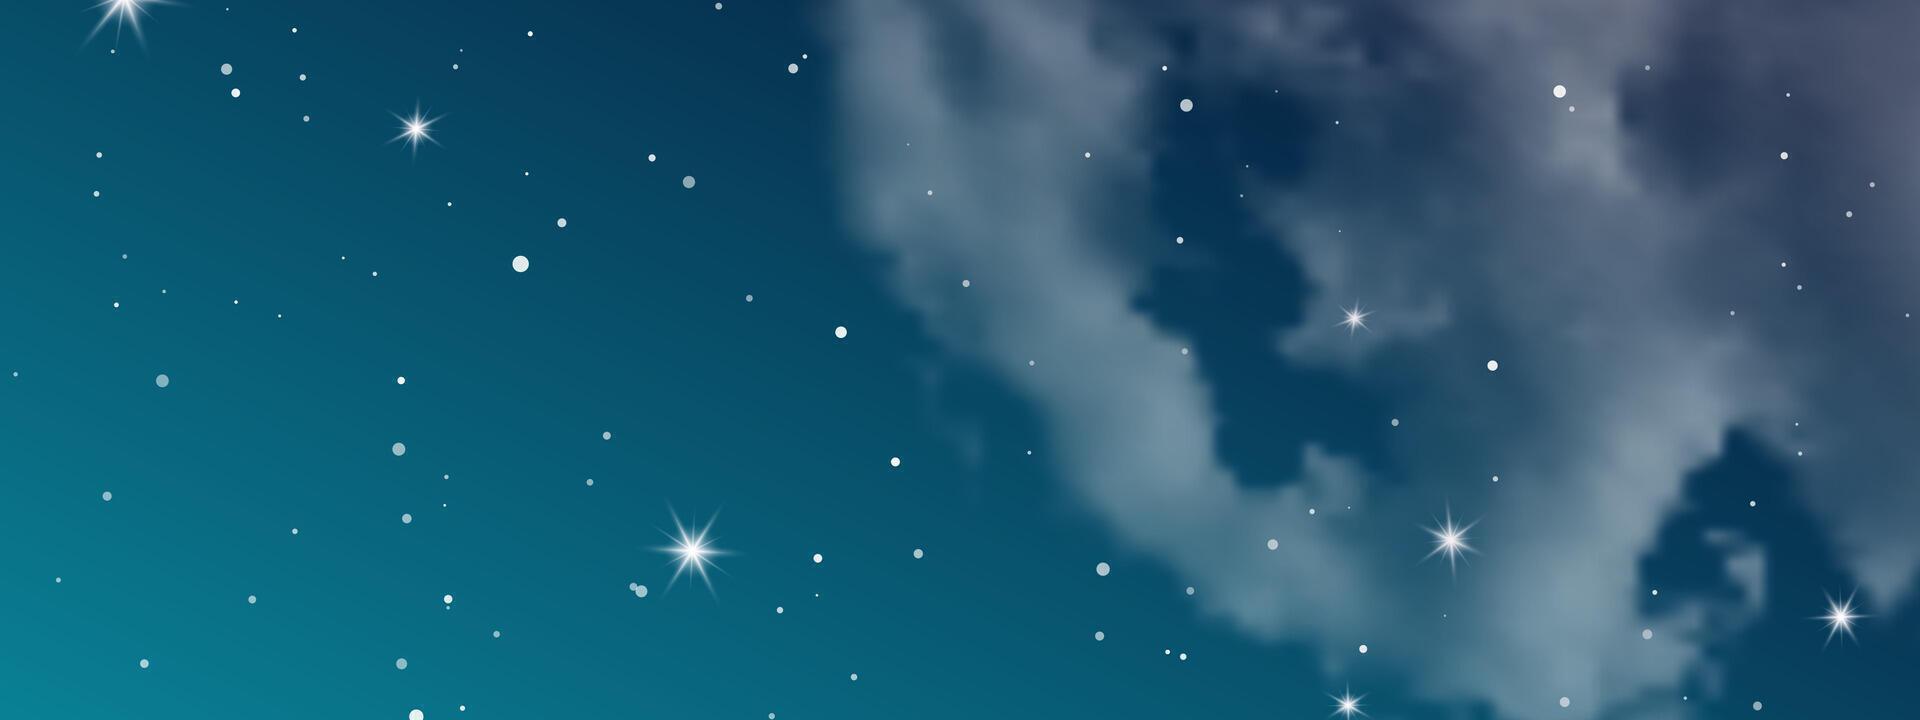 Night sky with clouds and many stars vector